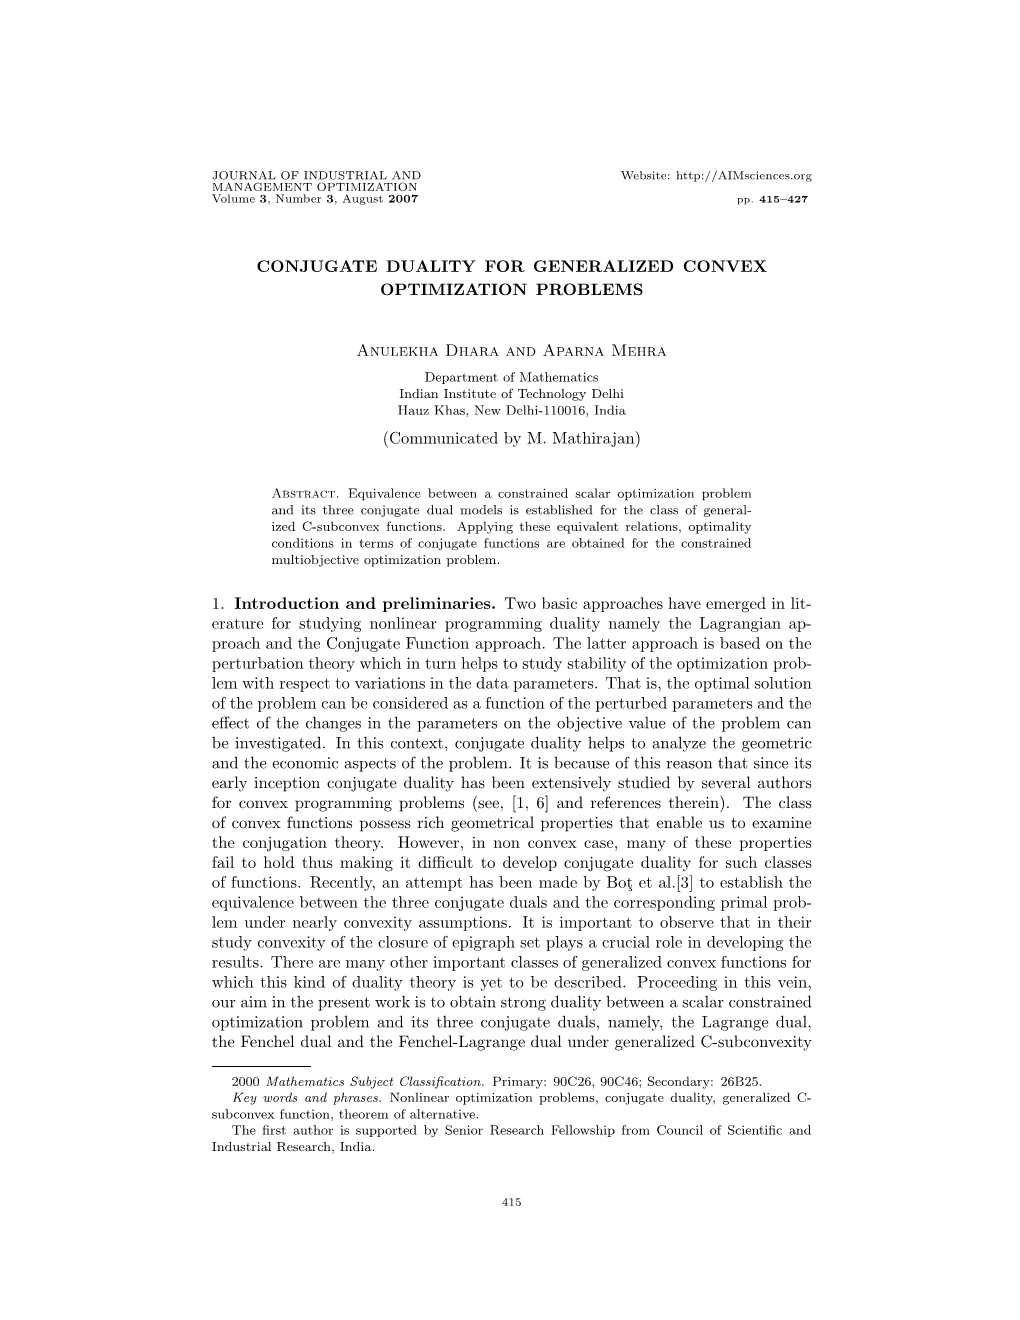 CONJUGATE DUALITY for GENERALIZED CONVEX OPTIMIZATION PROBLEMS Anulekha Dhara and Aparna Mehra